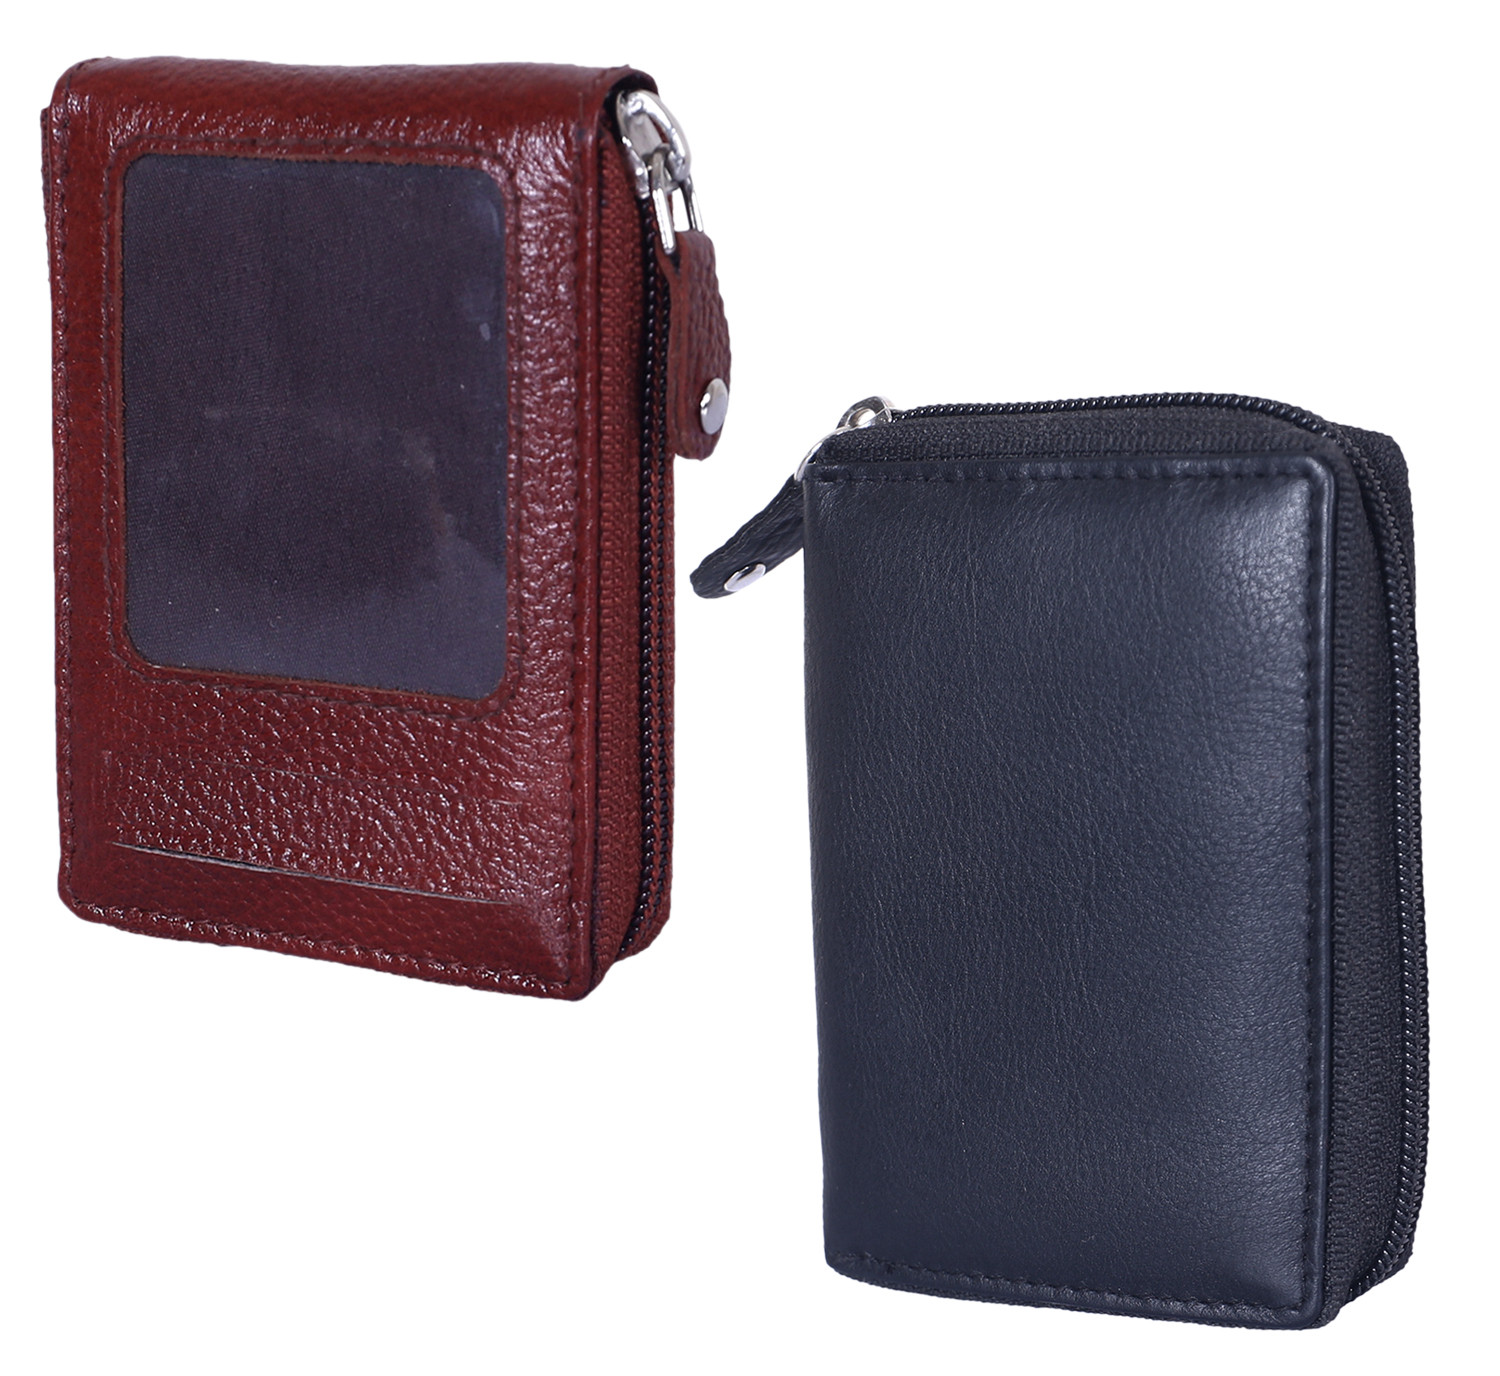 Kuber Industries Soft Leather Card Holder | Zipper Wallet For Man & Woman With 11 Slot Pack Of 2 (Black & Brown)